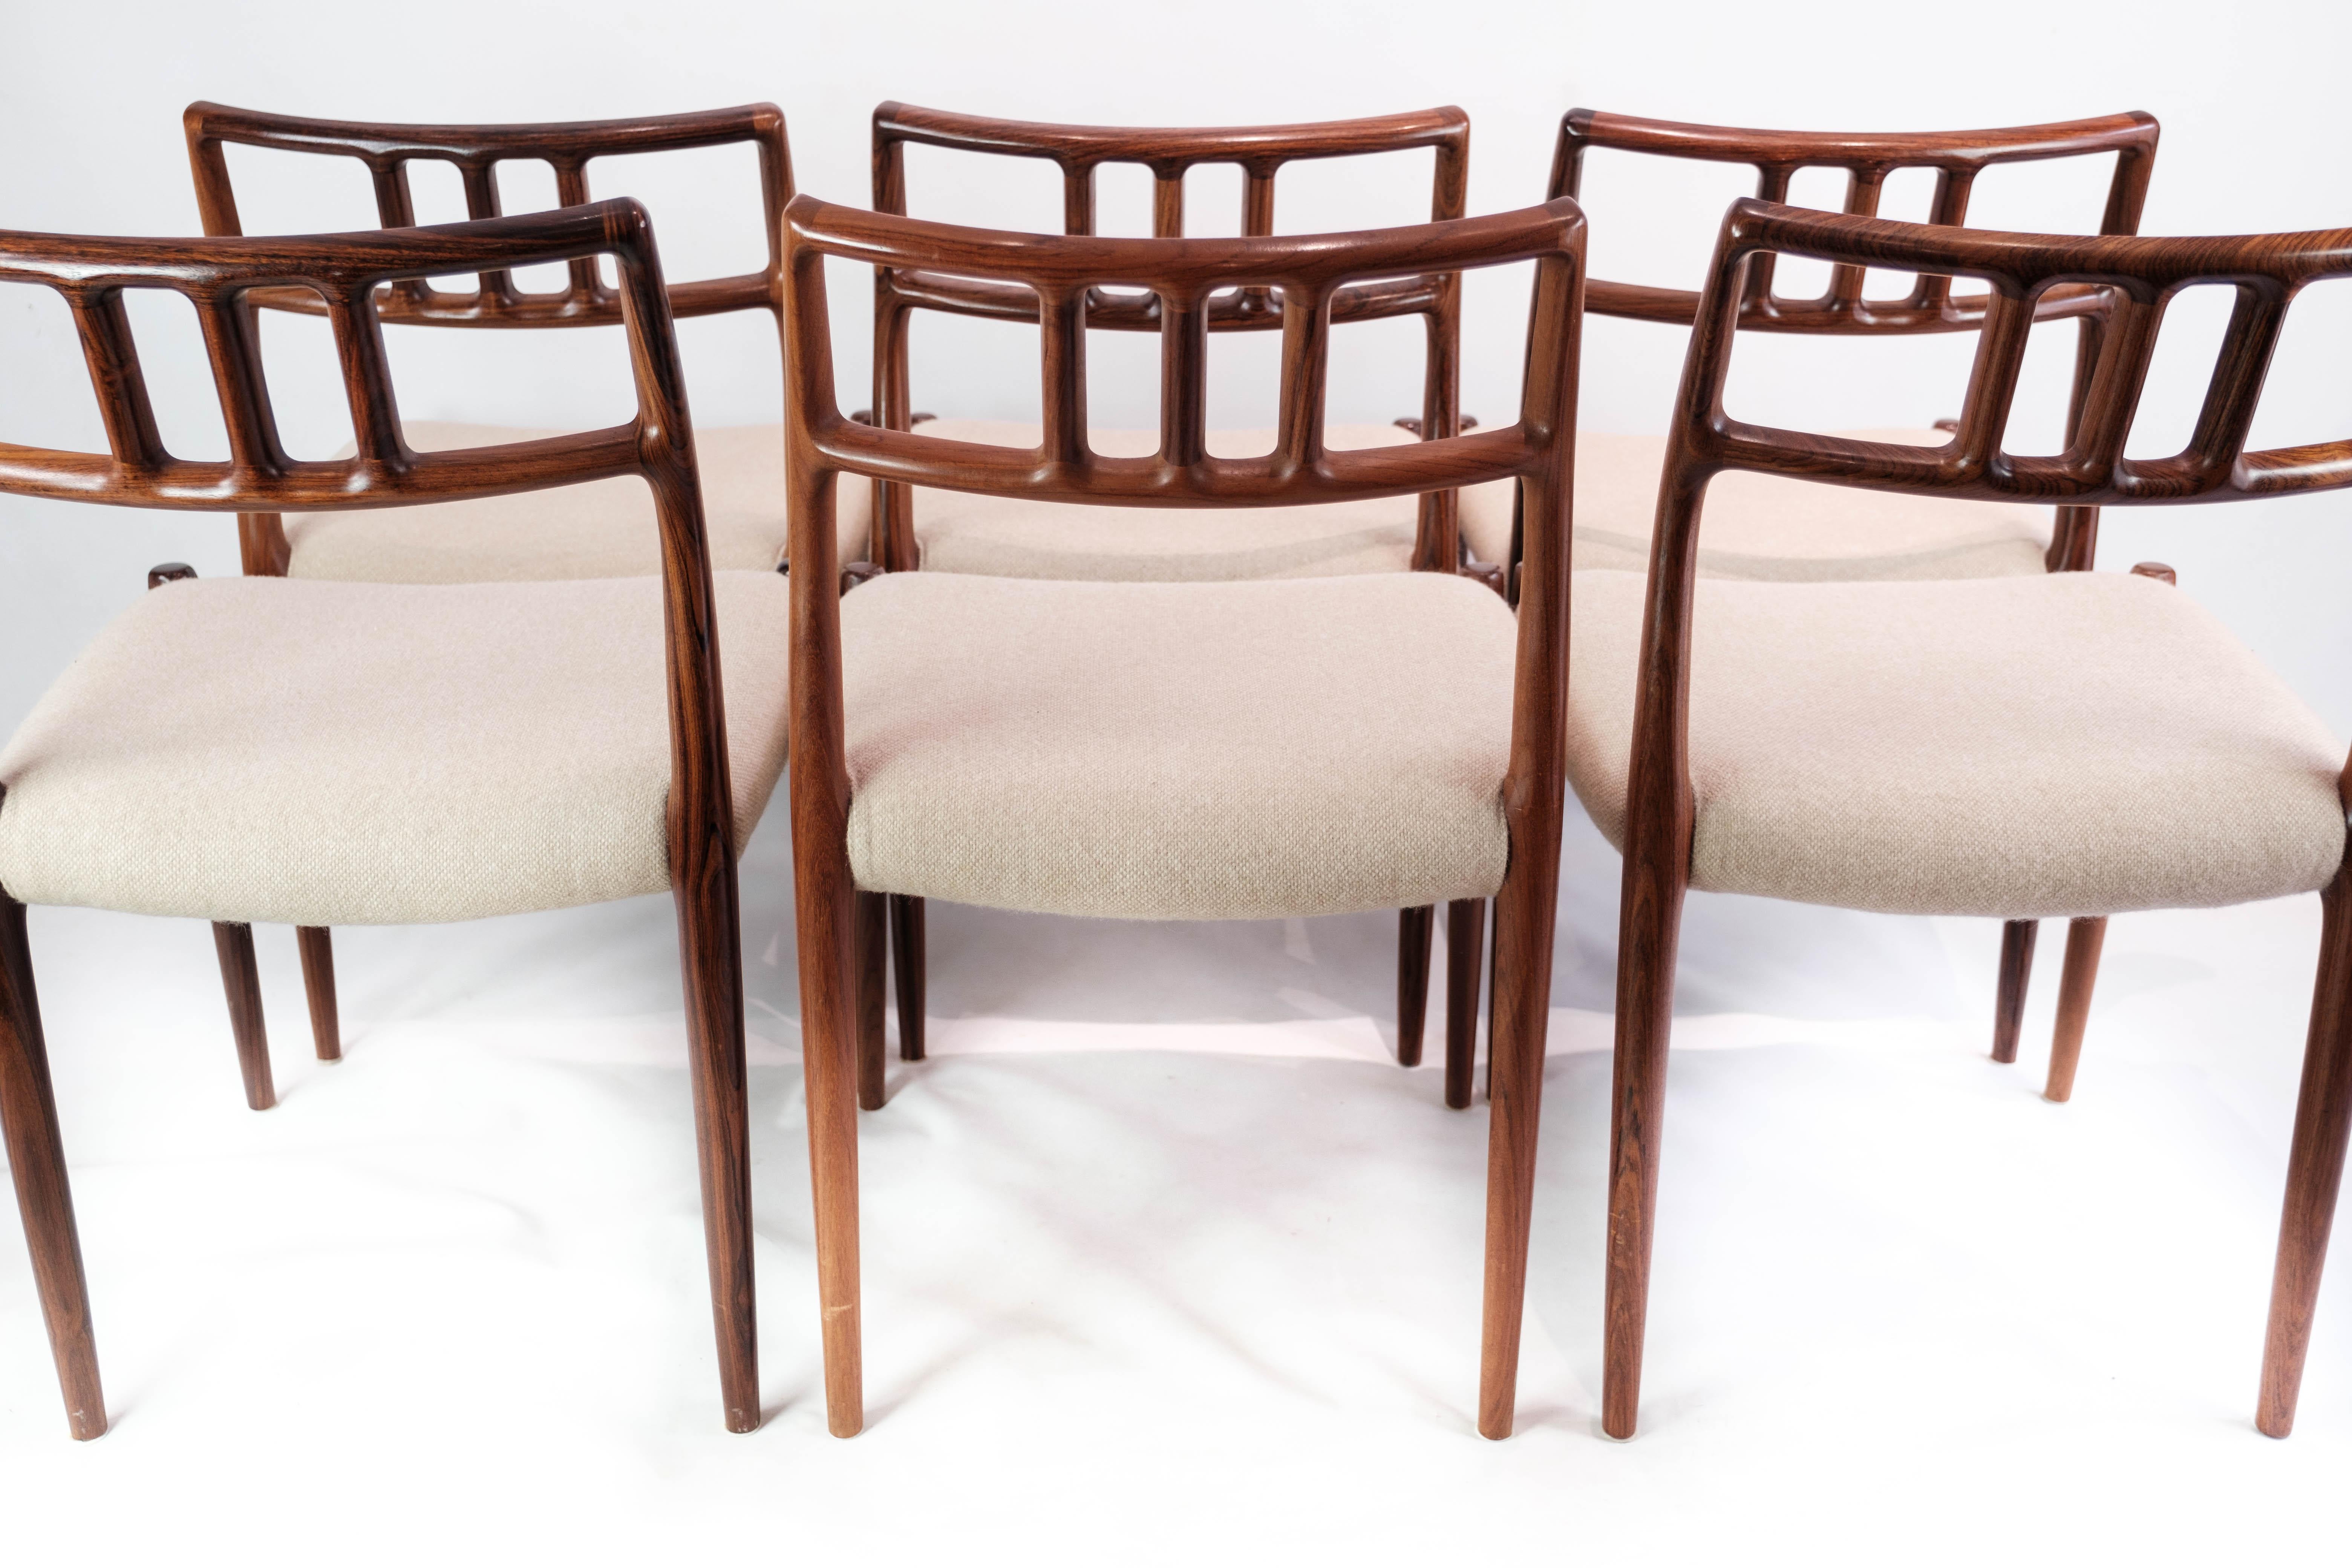 Fabric Set of Six Dining Room Chairs, Model 79, Designed by N.O. Moeller, 1960s